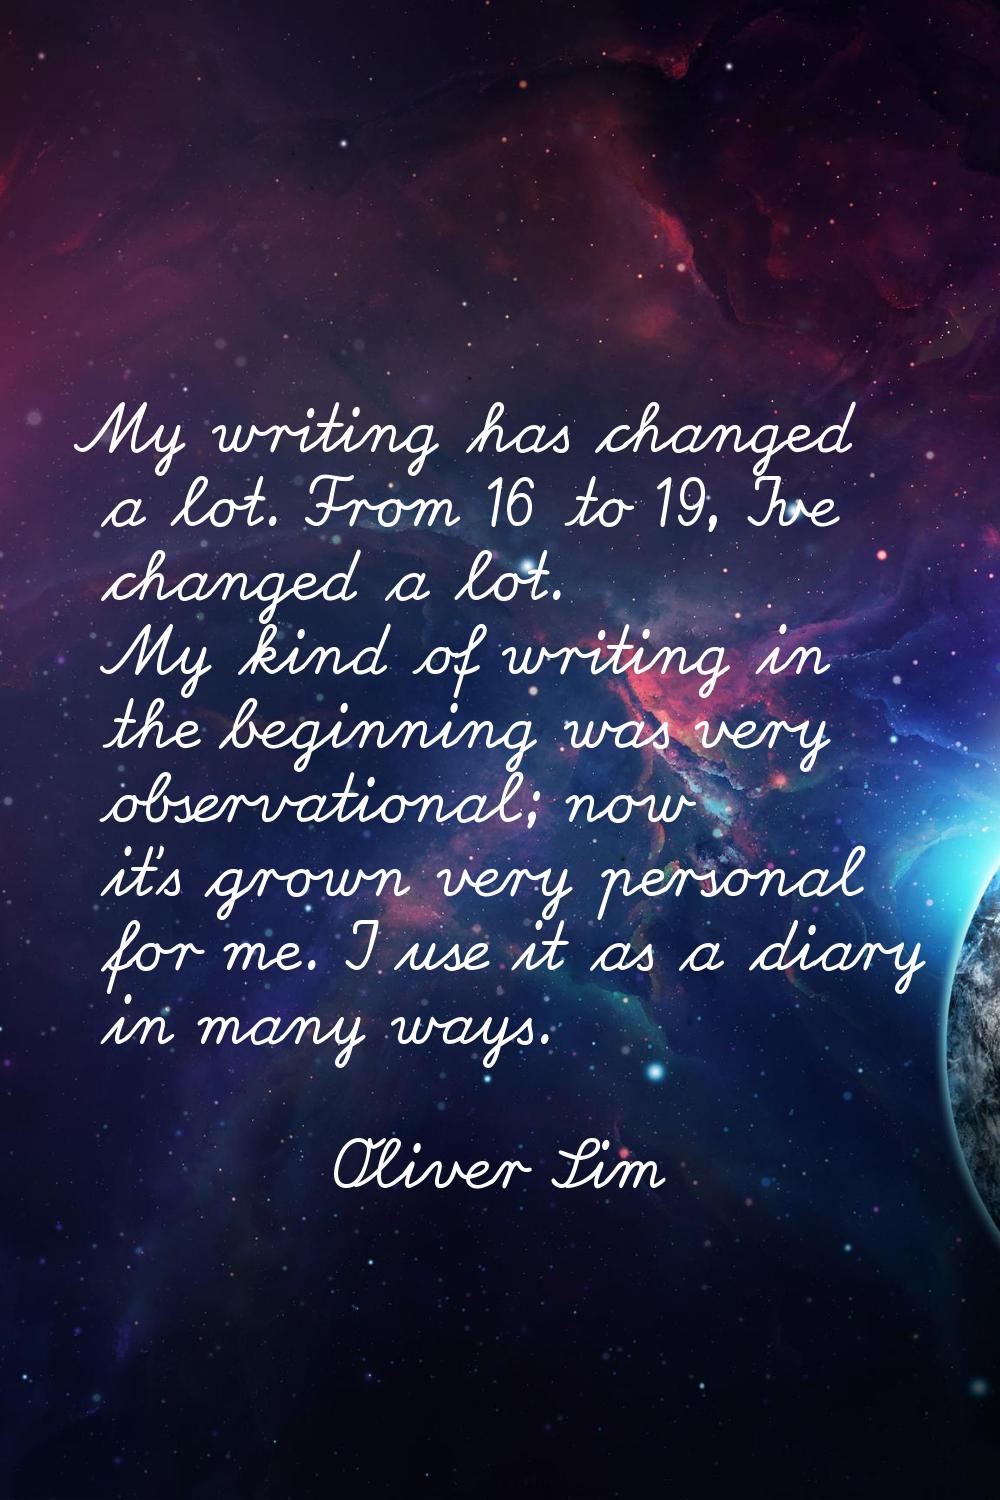 My writing has changed a lot. From 16 to 19, I've changed a lot. My kind of writing in the beginnin